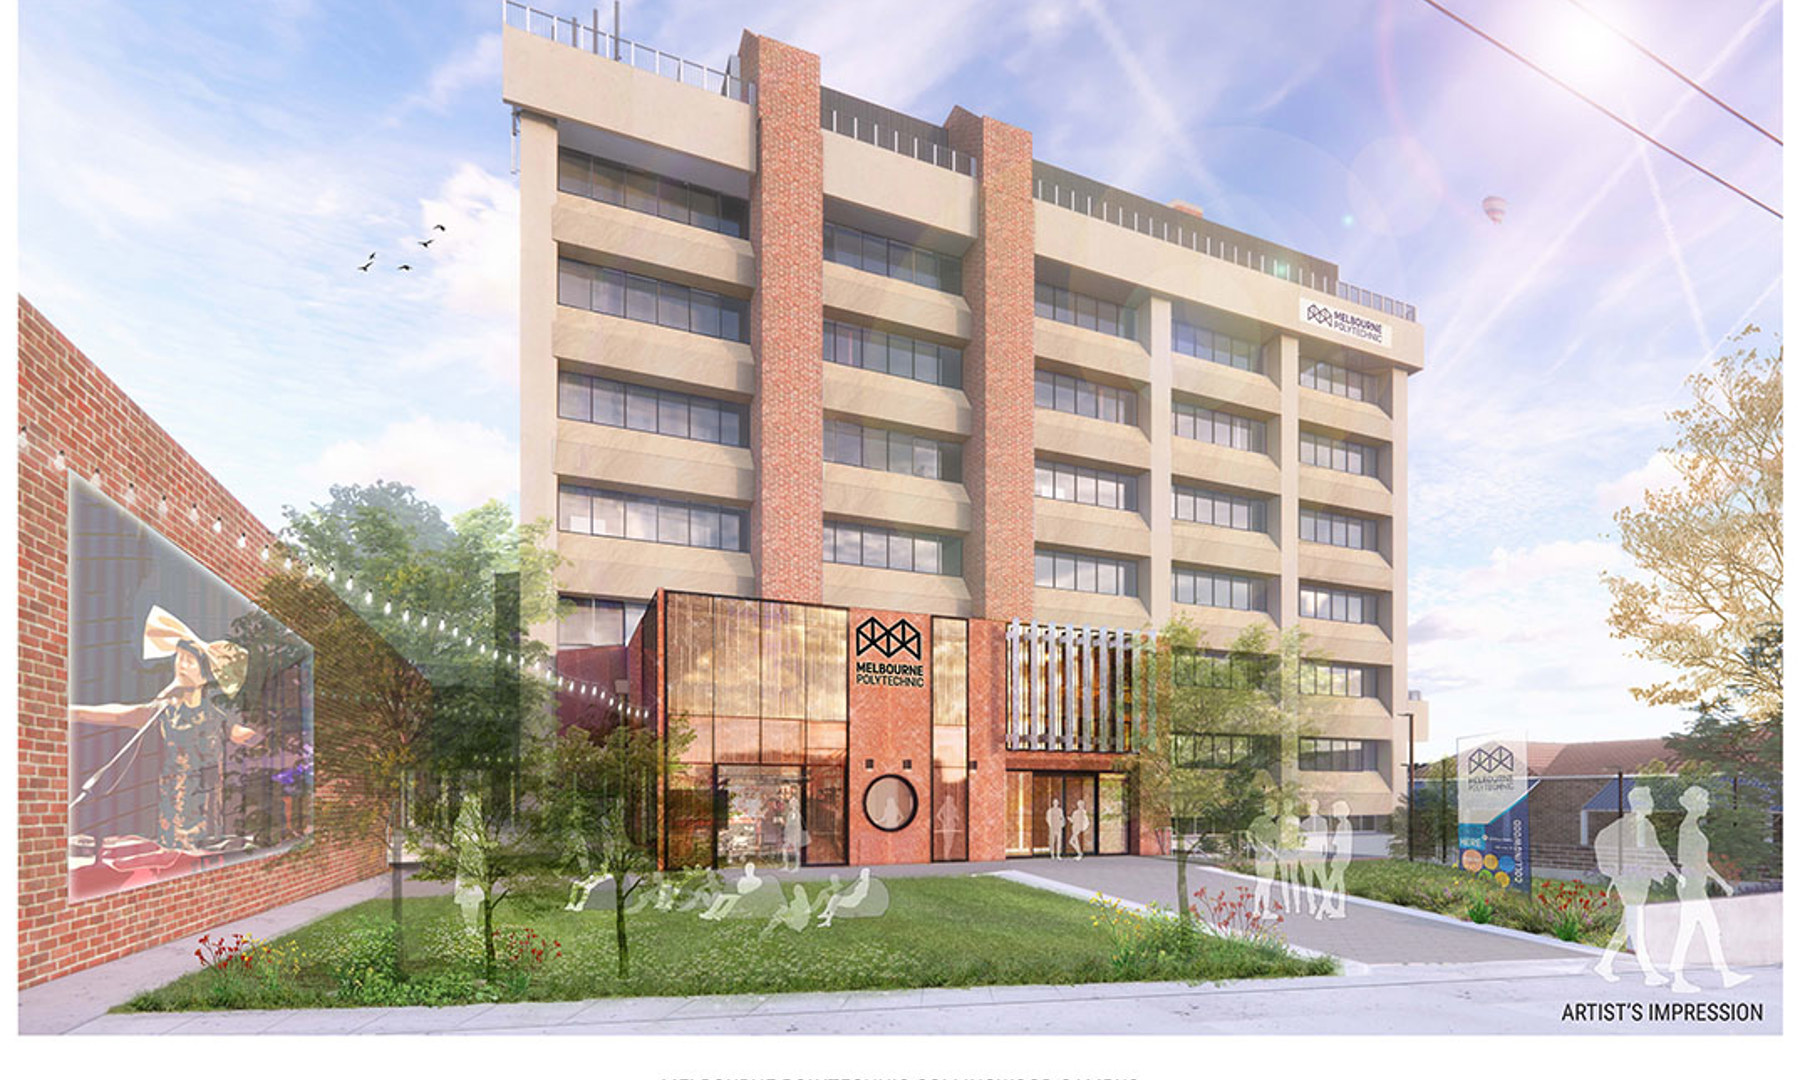 Artist impression, street view of the Collingwood Campus transformation